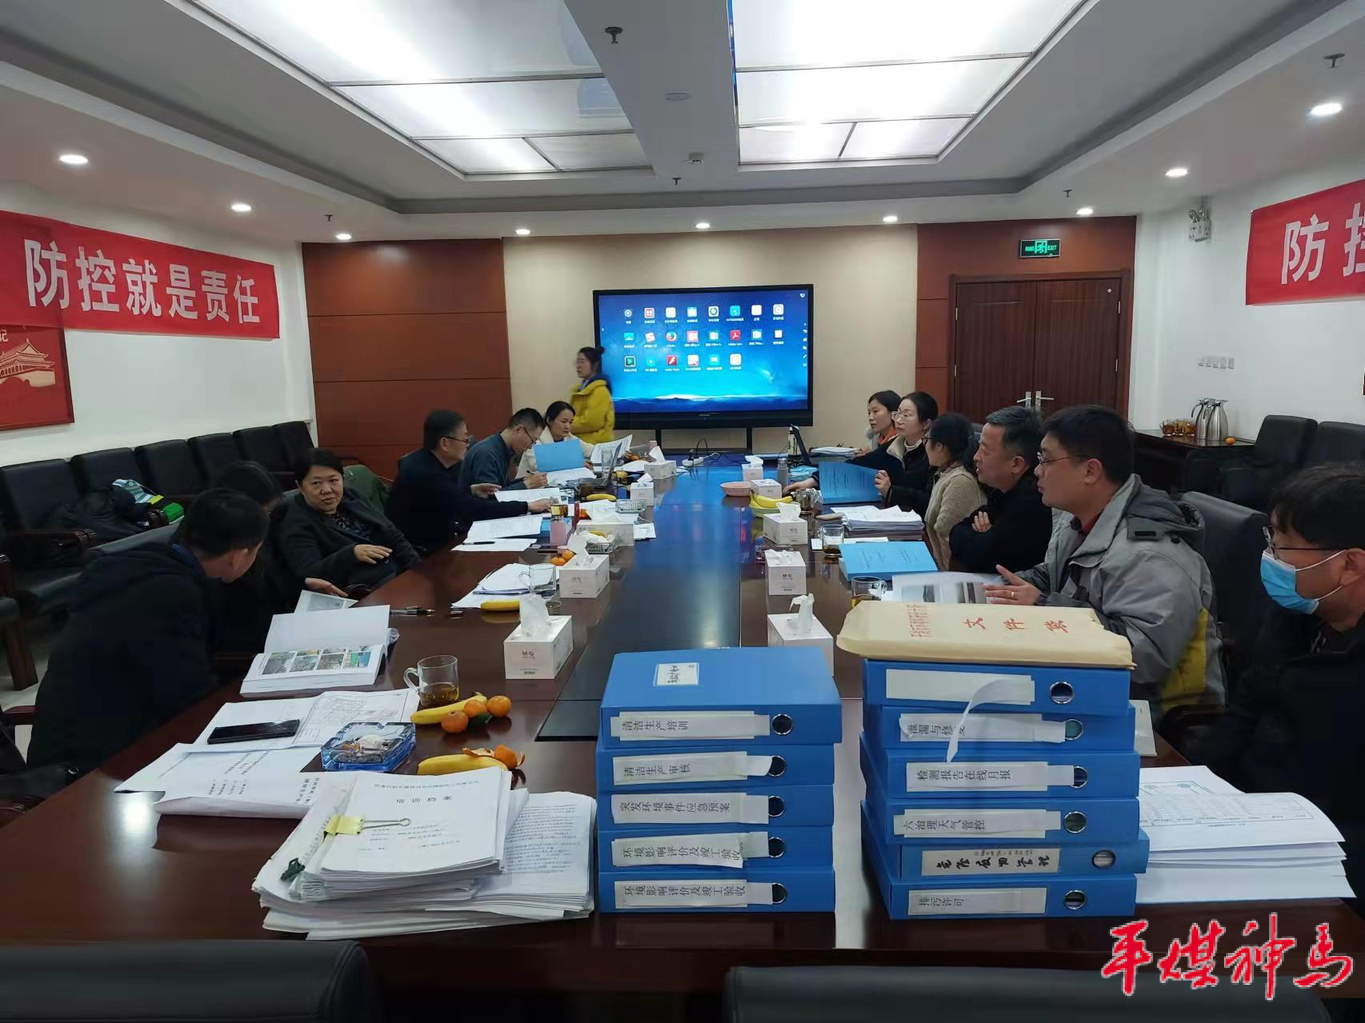 Kaifeng Xinghua Company successfully passed the mid-term assessment and acceptance of the provincial